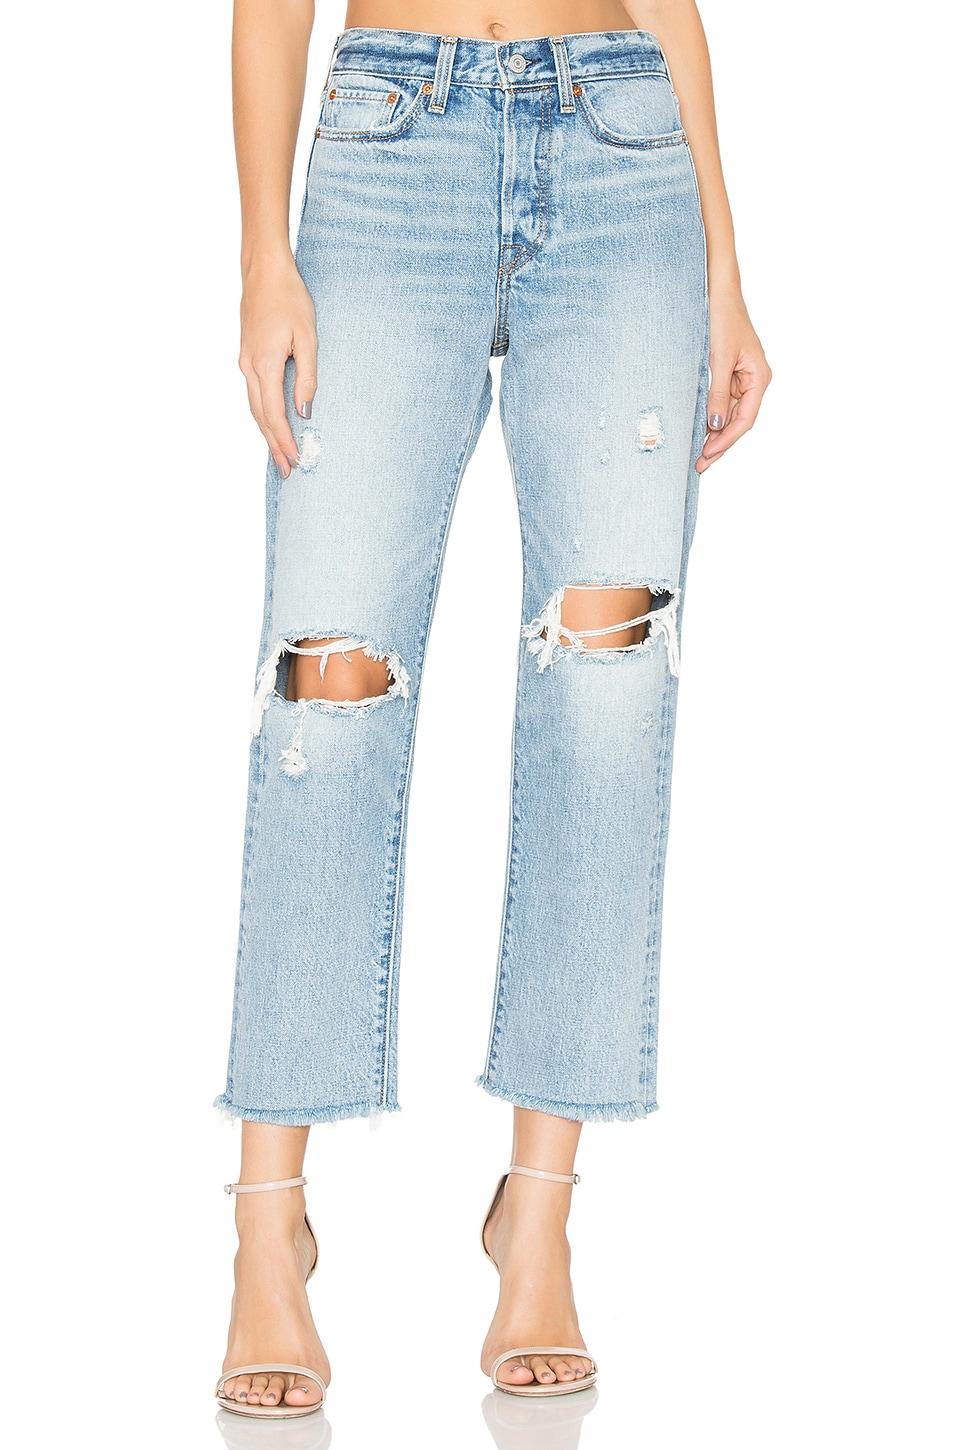 LEVI'S Wedgie Straight in Lost Inside | REVOLVE